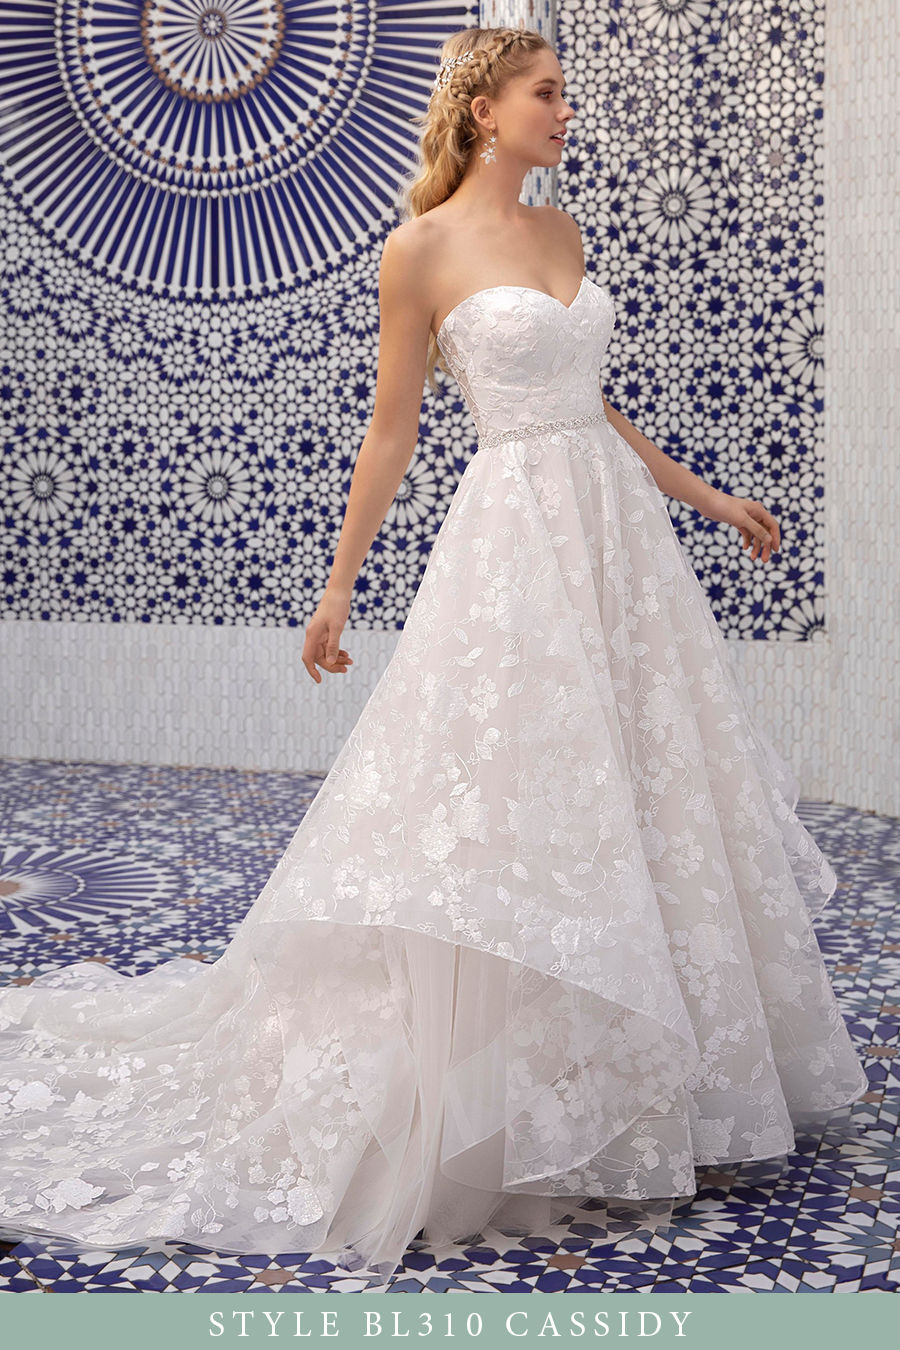 NEW Beloved by Casablanca Bridal Fall 2019 Collection: Adored In Morocco | Affordable Bohemian Classic Wedding Dresses